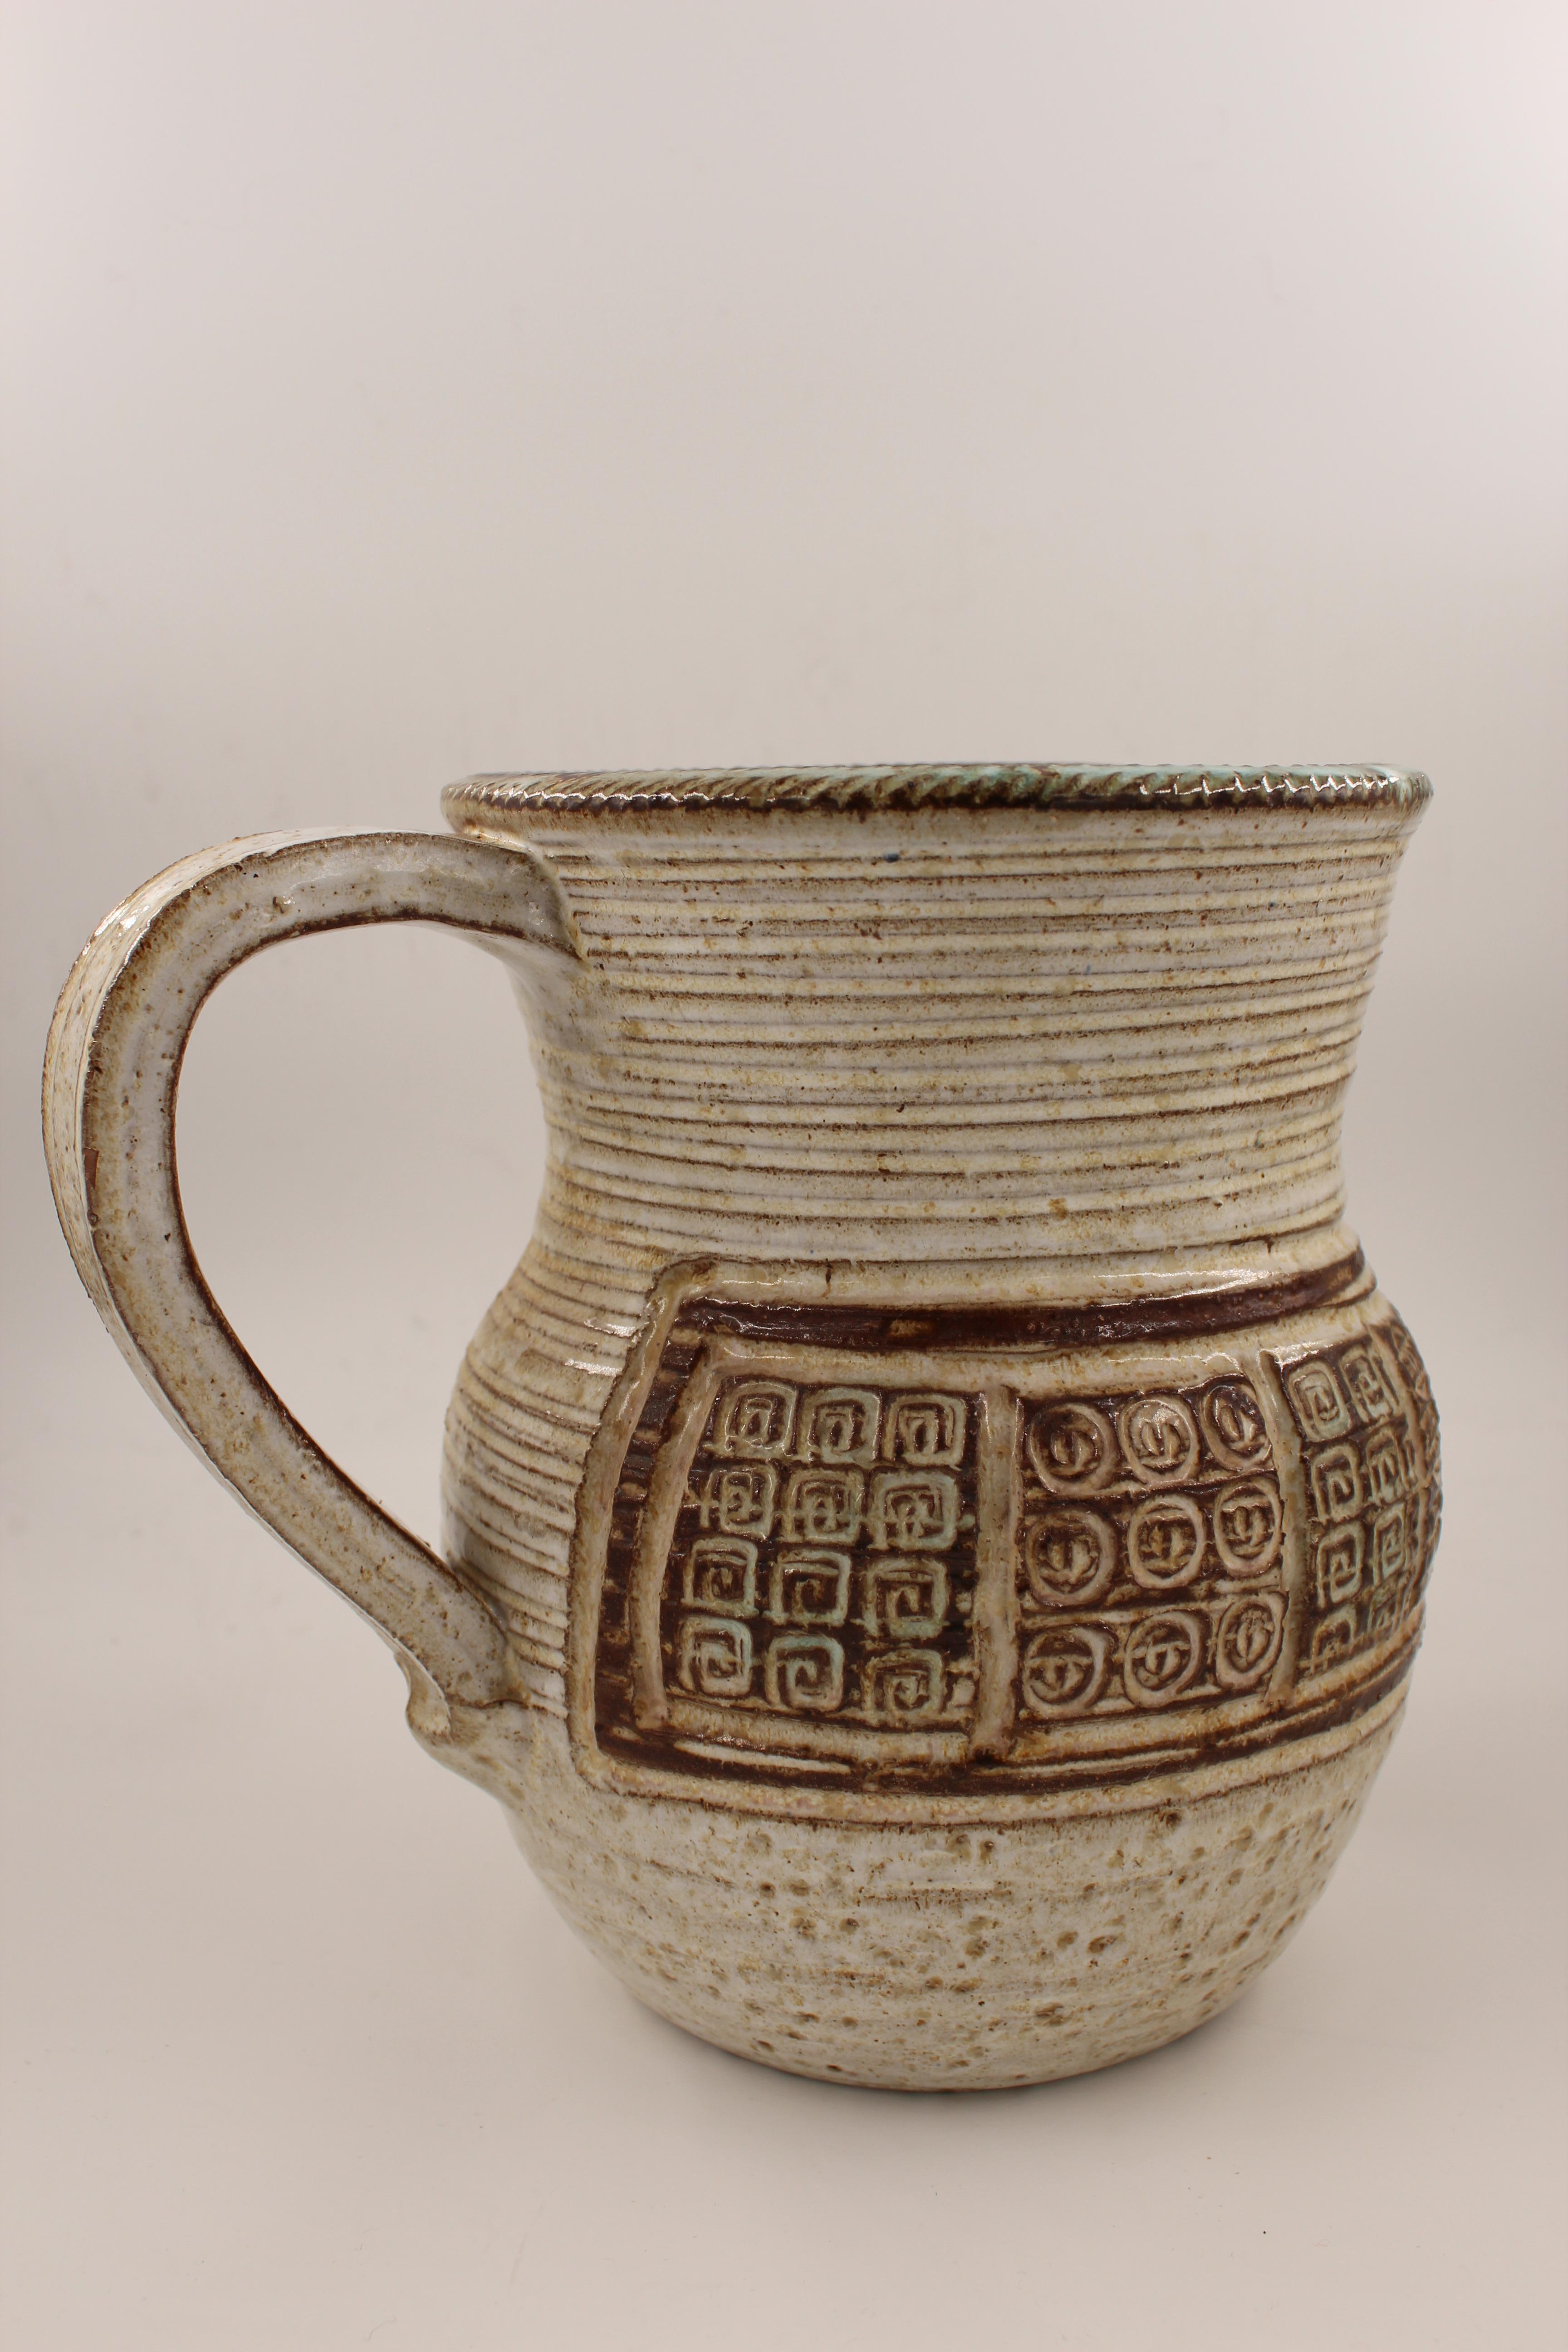 Midcentury ceramic glazed pitcher 1960s by Marcel Giraud, Vallauris, France.
Marcel Giraud (born 1937), from Vallauris, France. He became an apprentice potter at the Rubino workshop. He opened his own studio in 1960 creating mostly utilitarian ware.